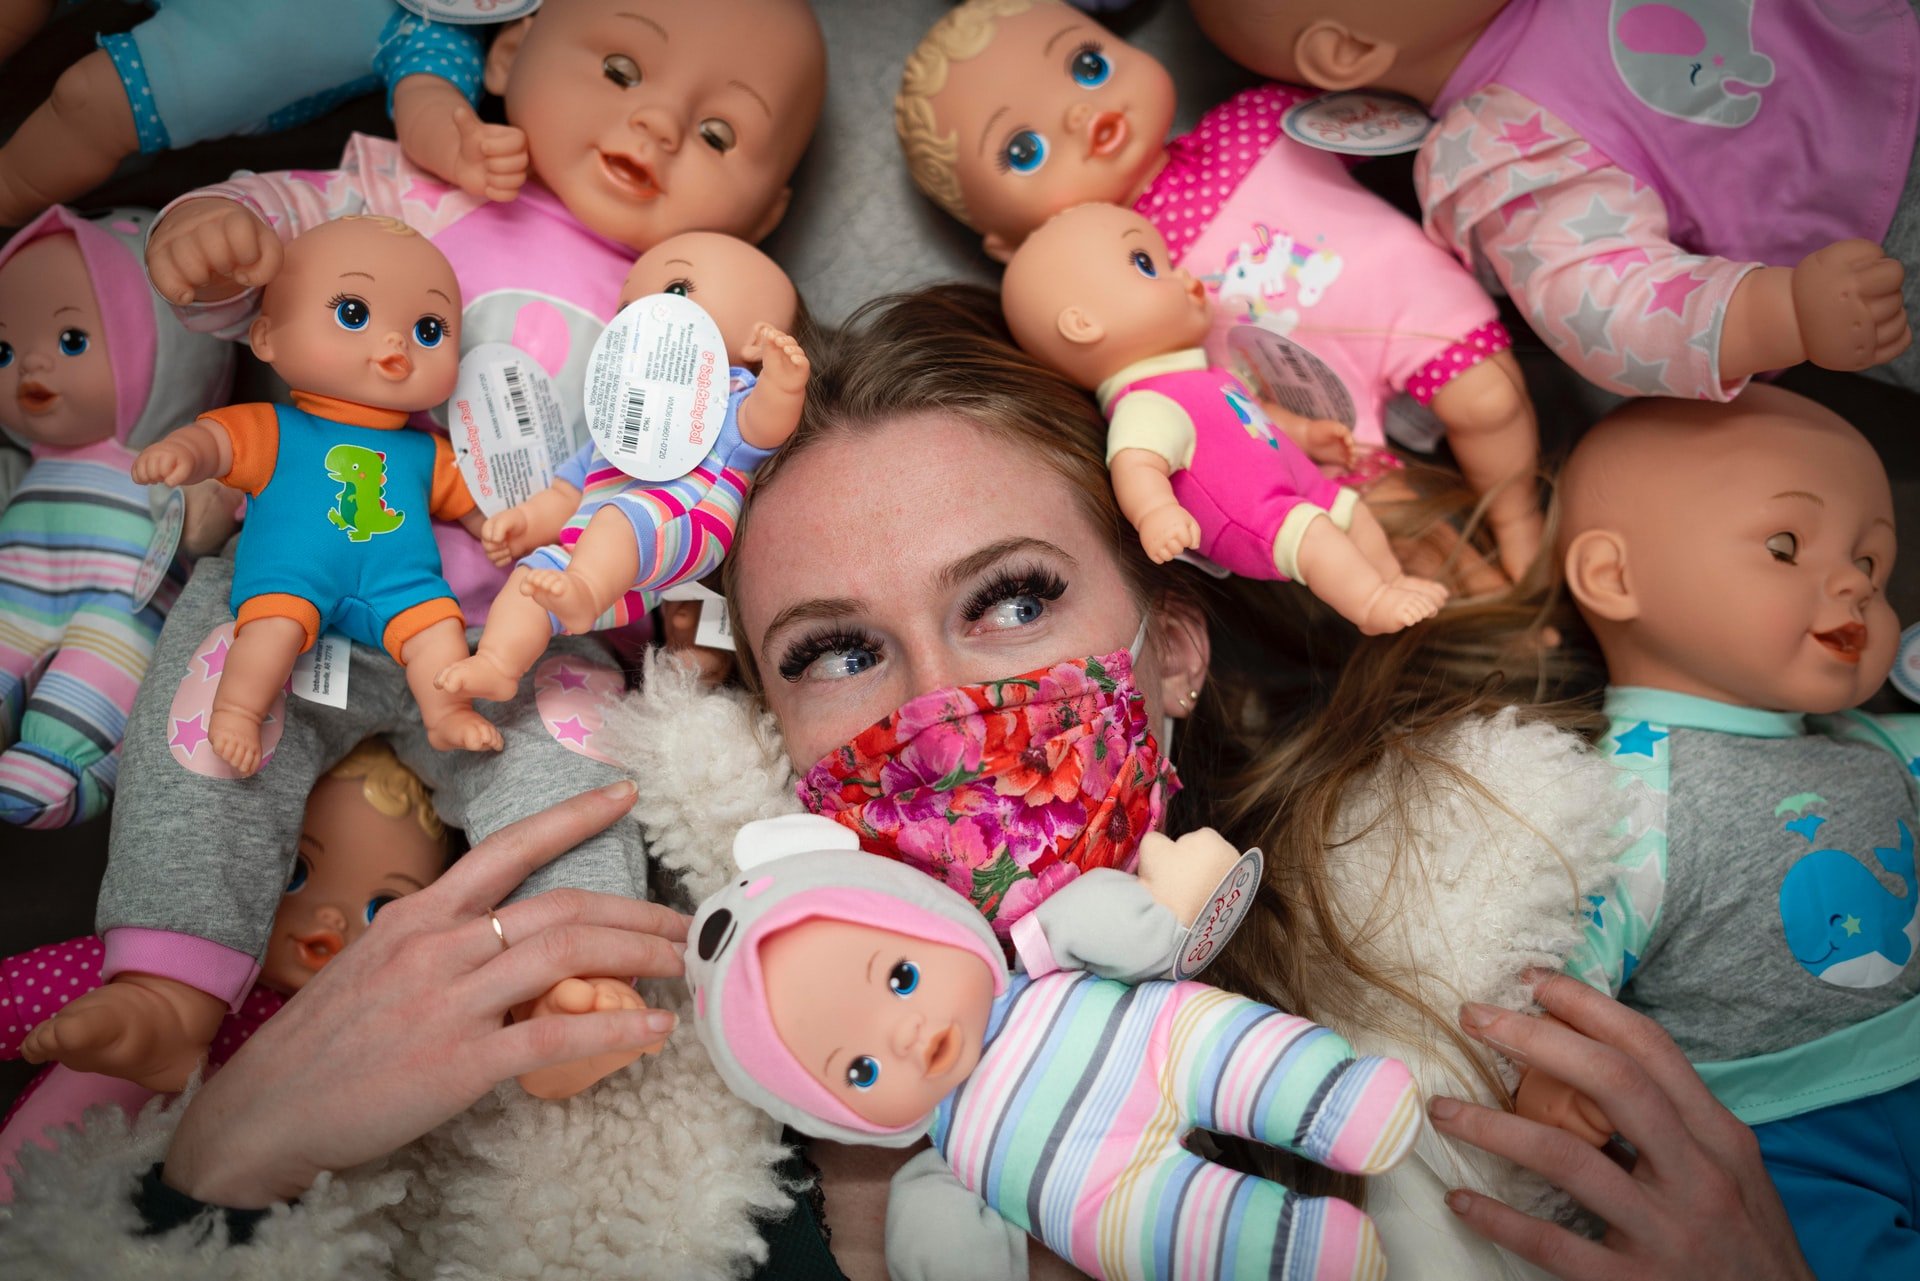 Girl with her dolls | Source: Unsplash